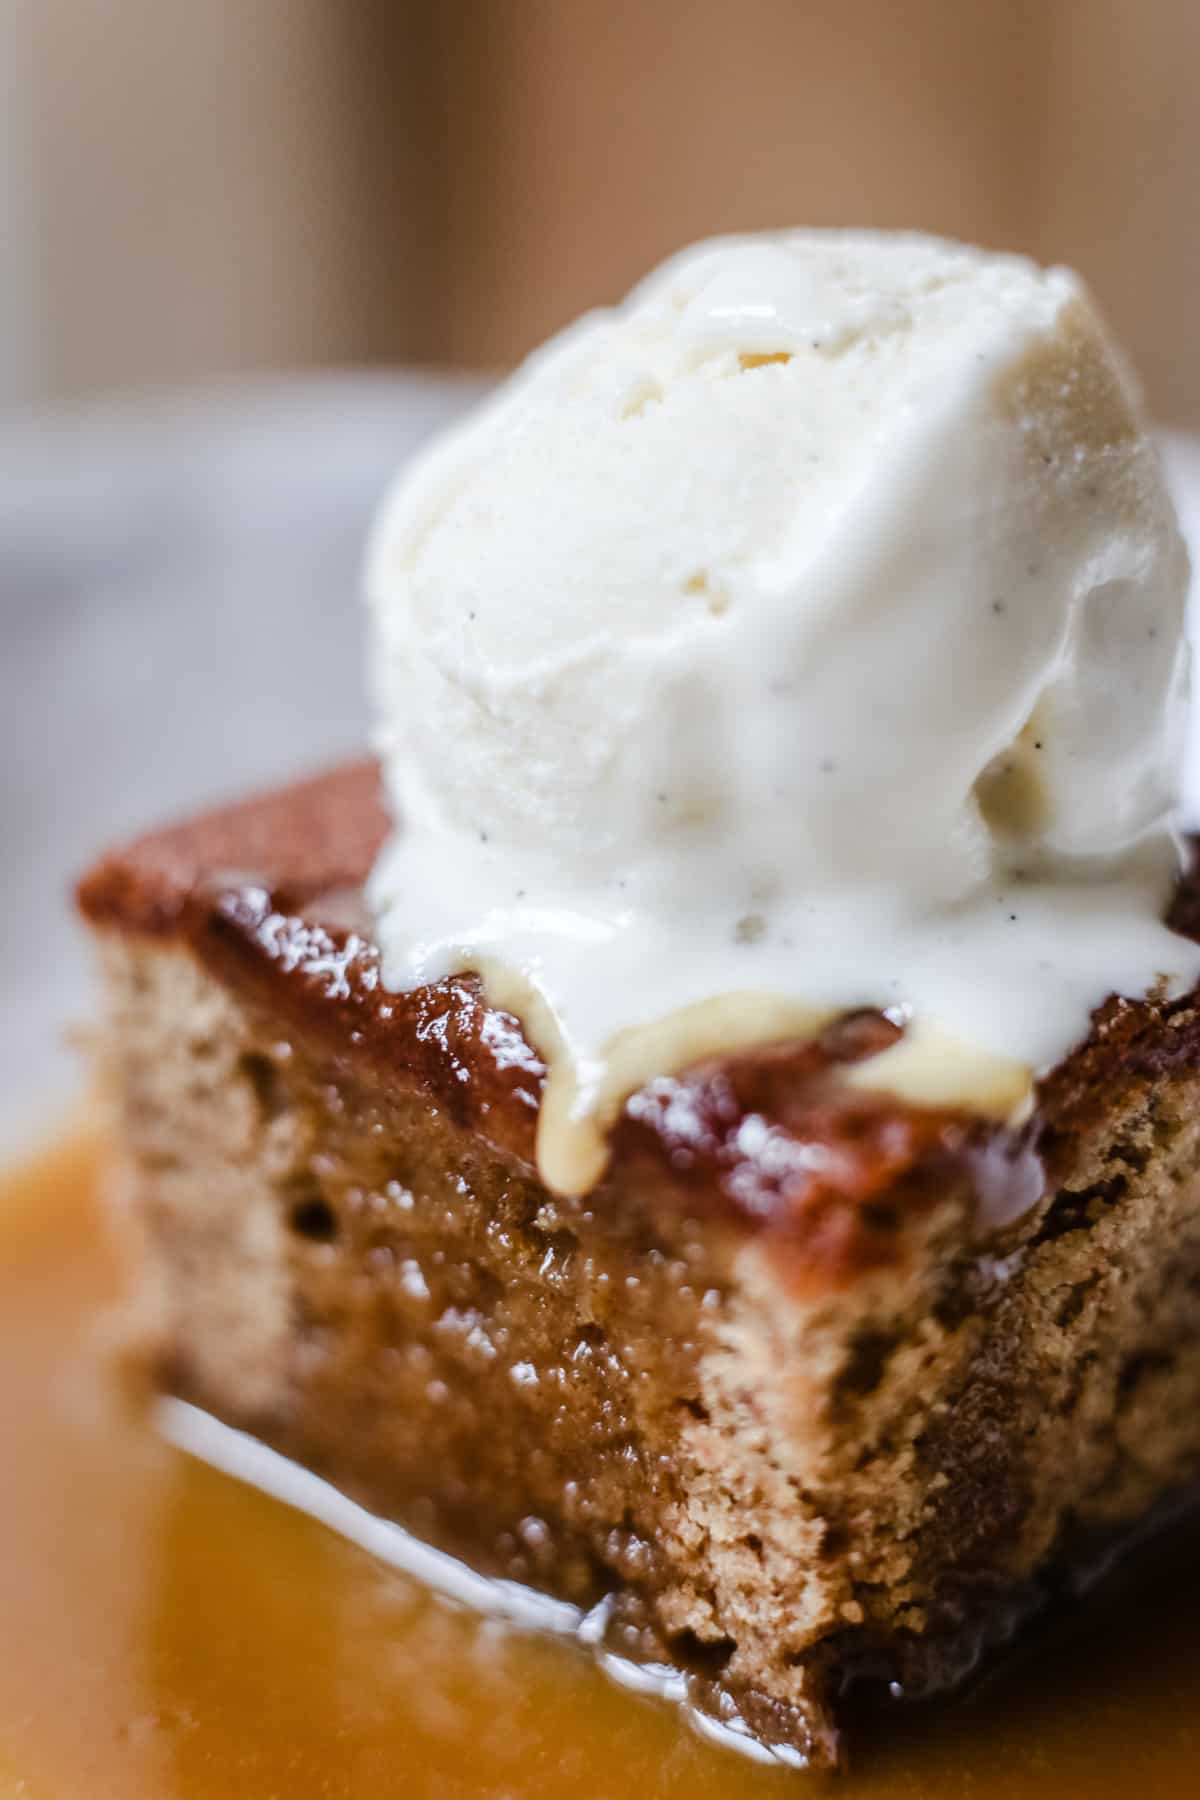 The Baileys in this Sticky Toffee Baileys Pudding is the best way to reinvent the British pub dessert classic. Baileys is baked into the sponge and poured liberally into the toffee sauce for heavenly reasons. This gluten-free version also goes one step further by using teff flour instead of wheat flour adding a further complexity of flavour.